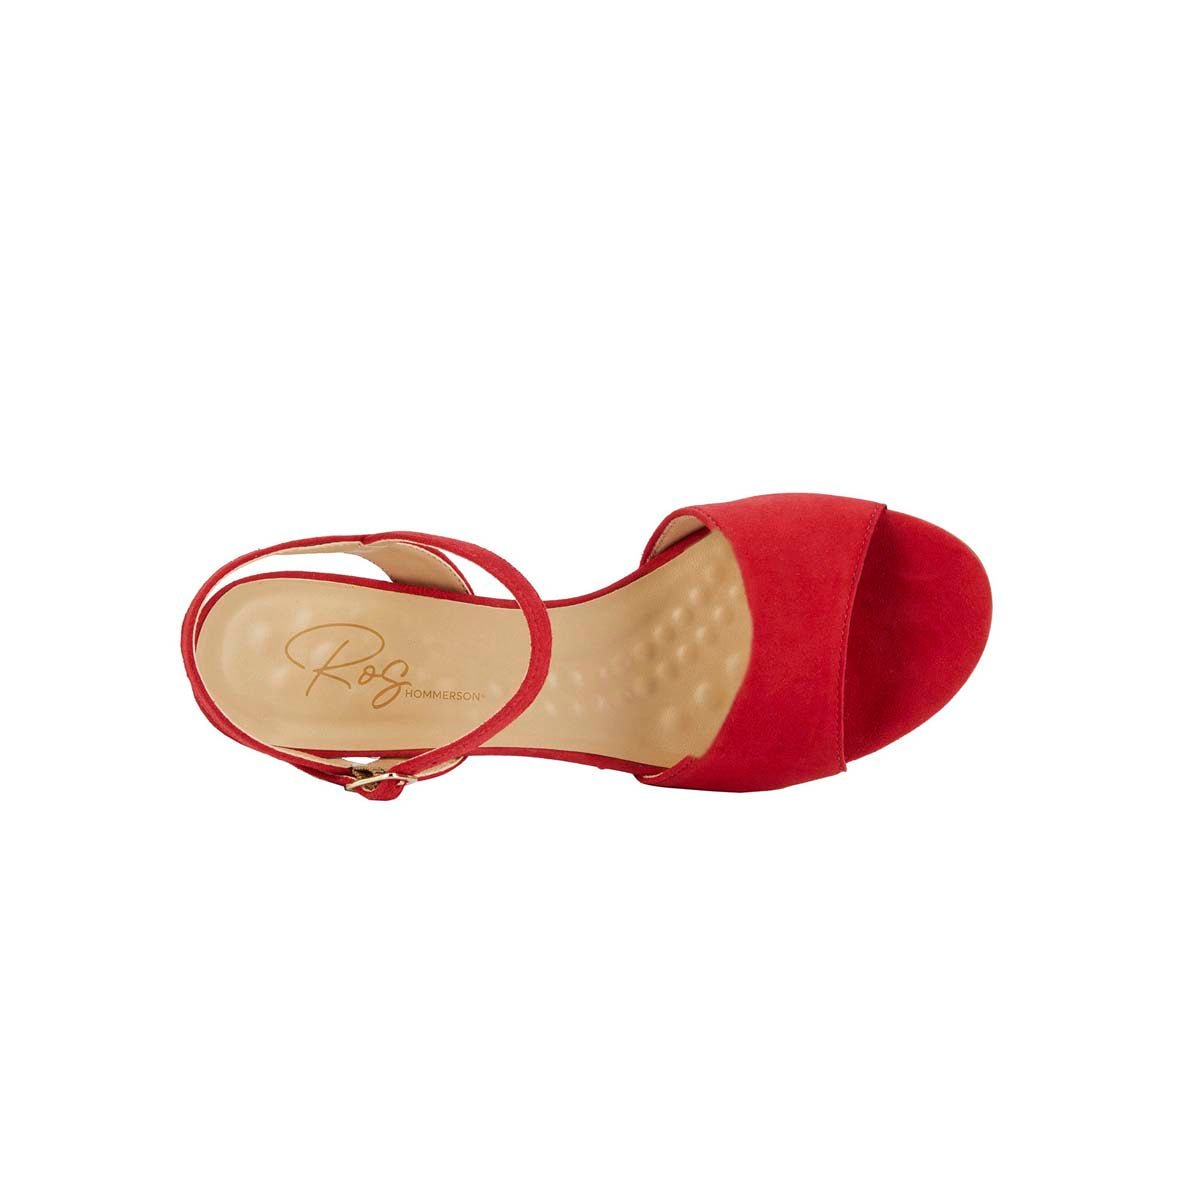 ROS HOMMERSON LYDIA WOMEN ADJUSTABLE BUCKLE STRAP SANDAL IN RED SUEDE - TLW Shoes